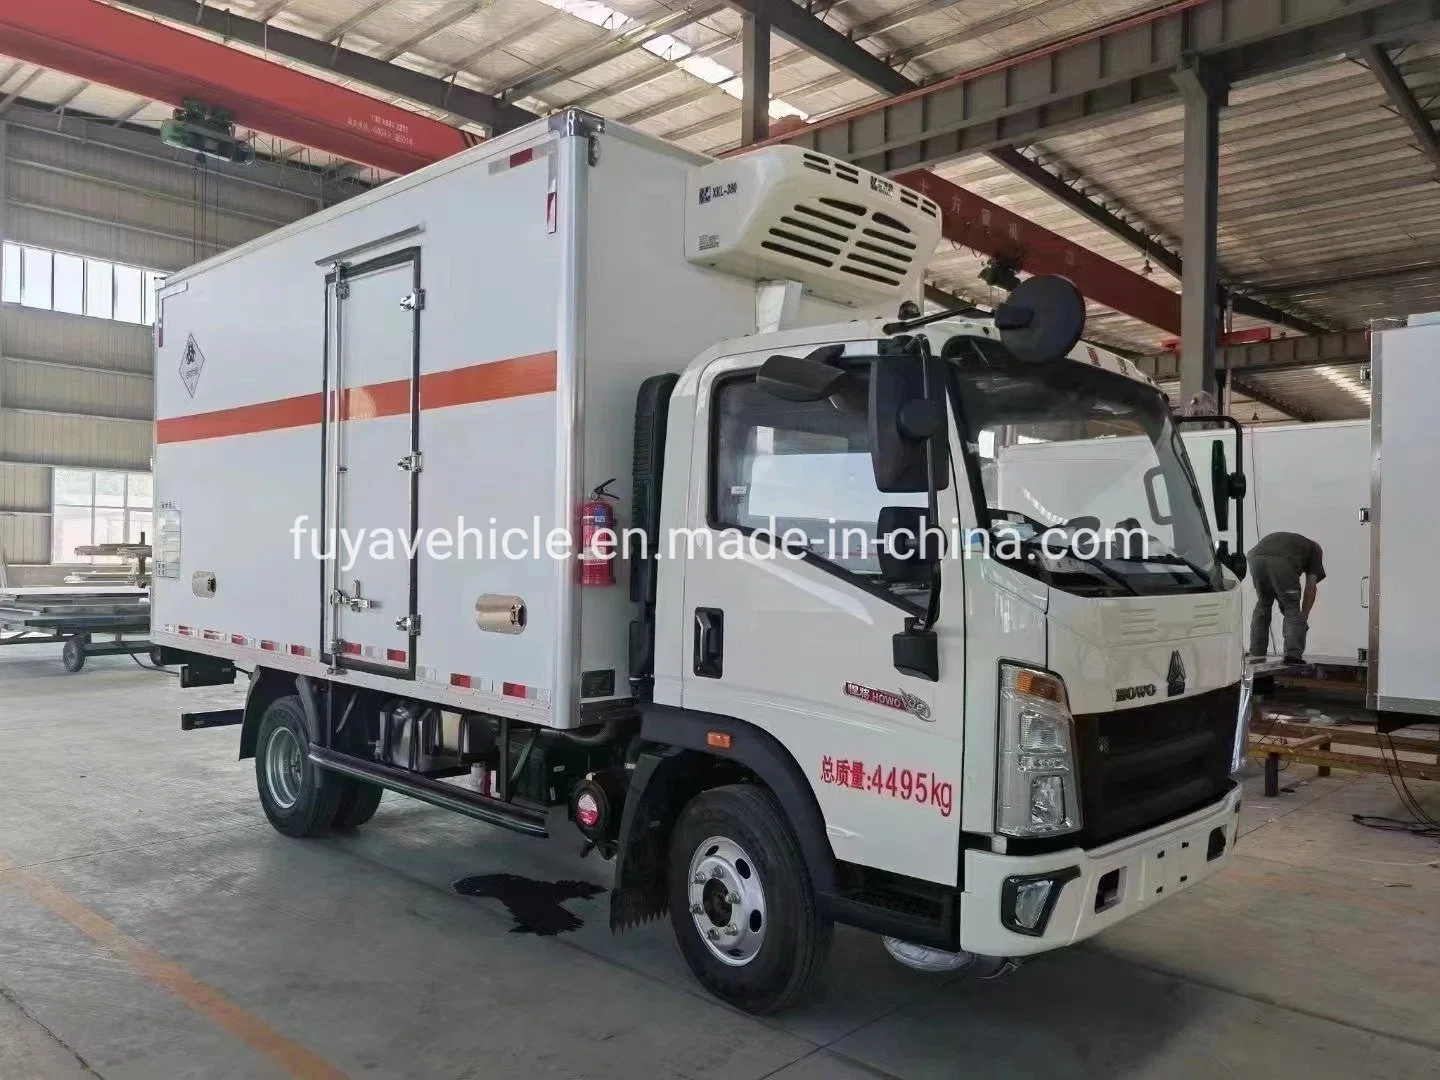 Sinotruk HOWO 5 Tons 4X2 Medical Waste Delivery Truck for Hospital Waste